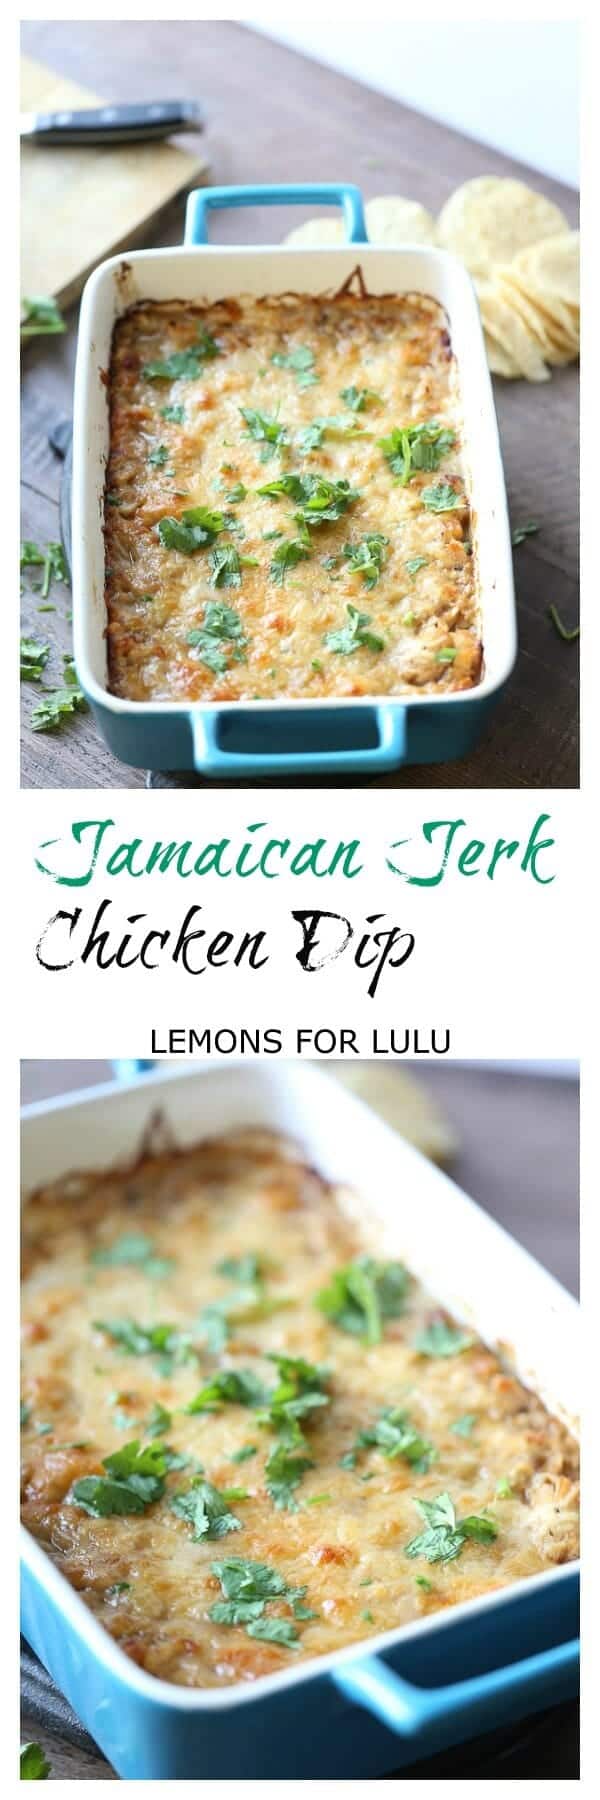 This Jamaican jerk chicken dip is tangy, creamy and all together delicious! It’s everything you could want in a dip! lemonsforlulu.com